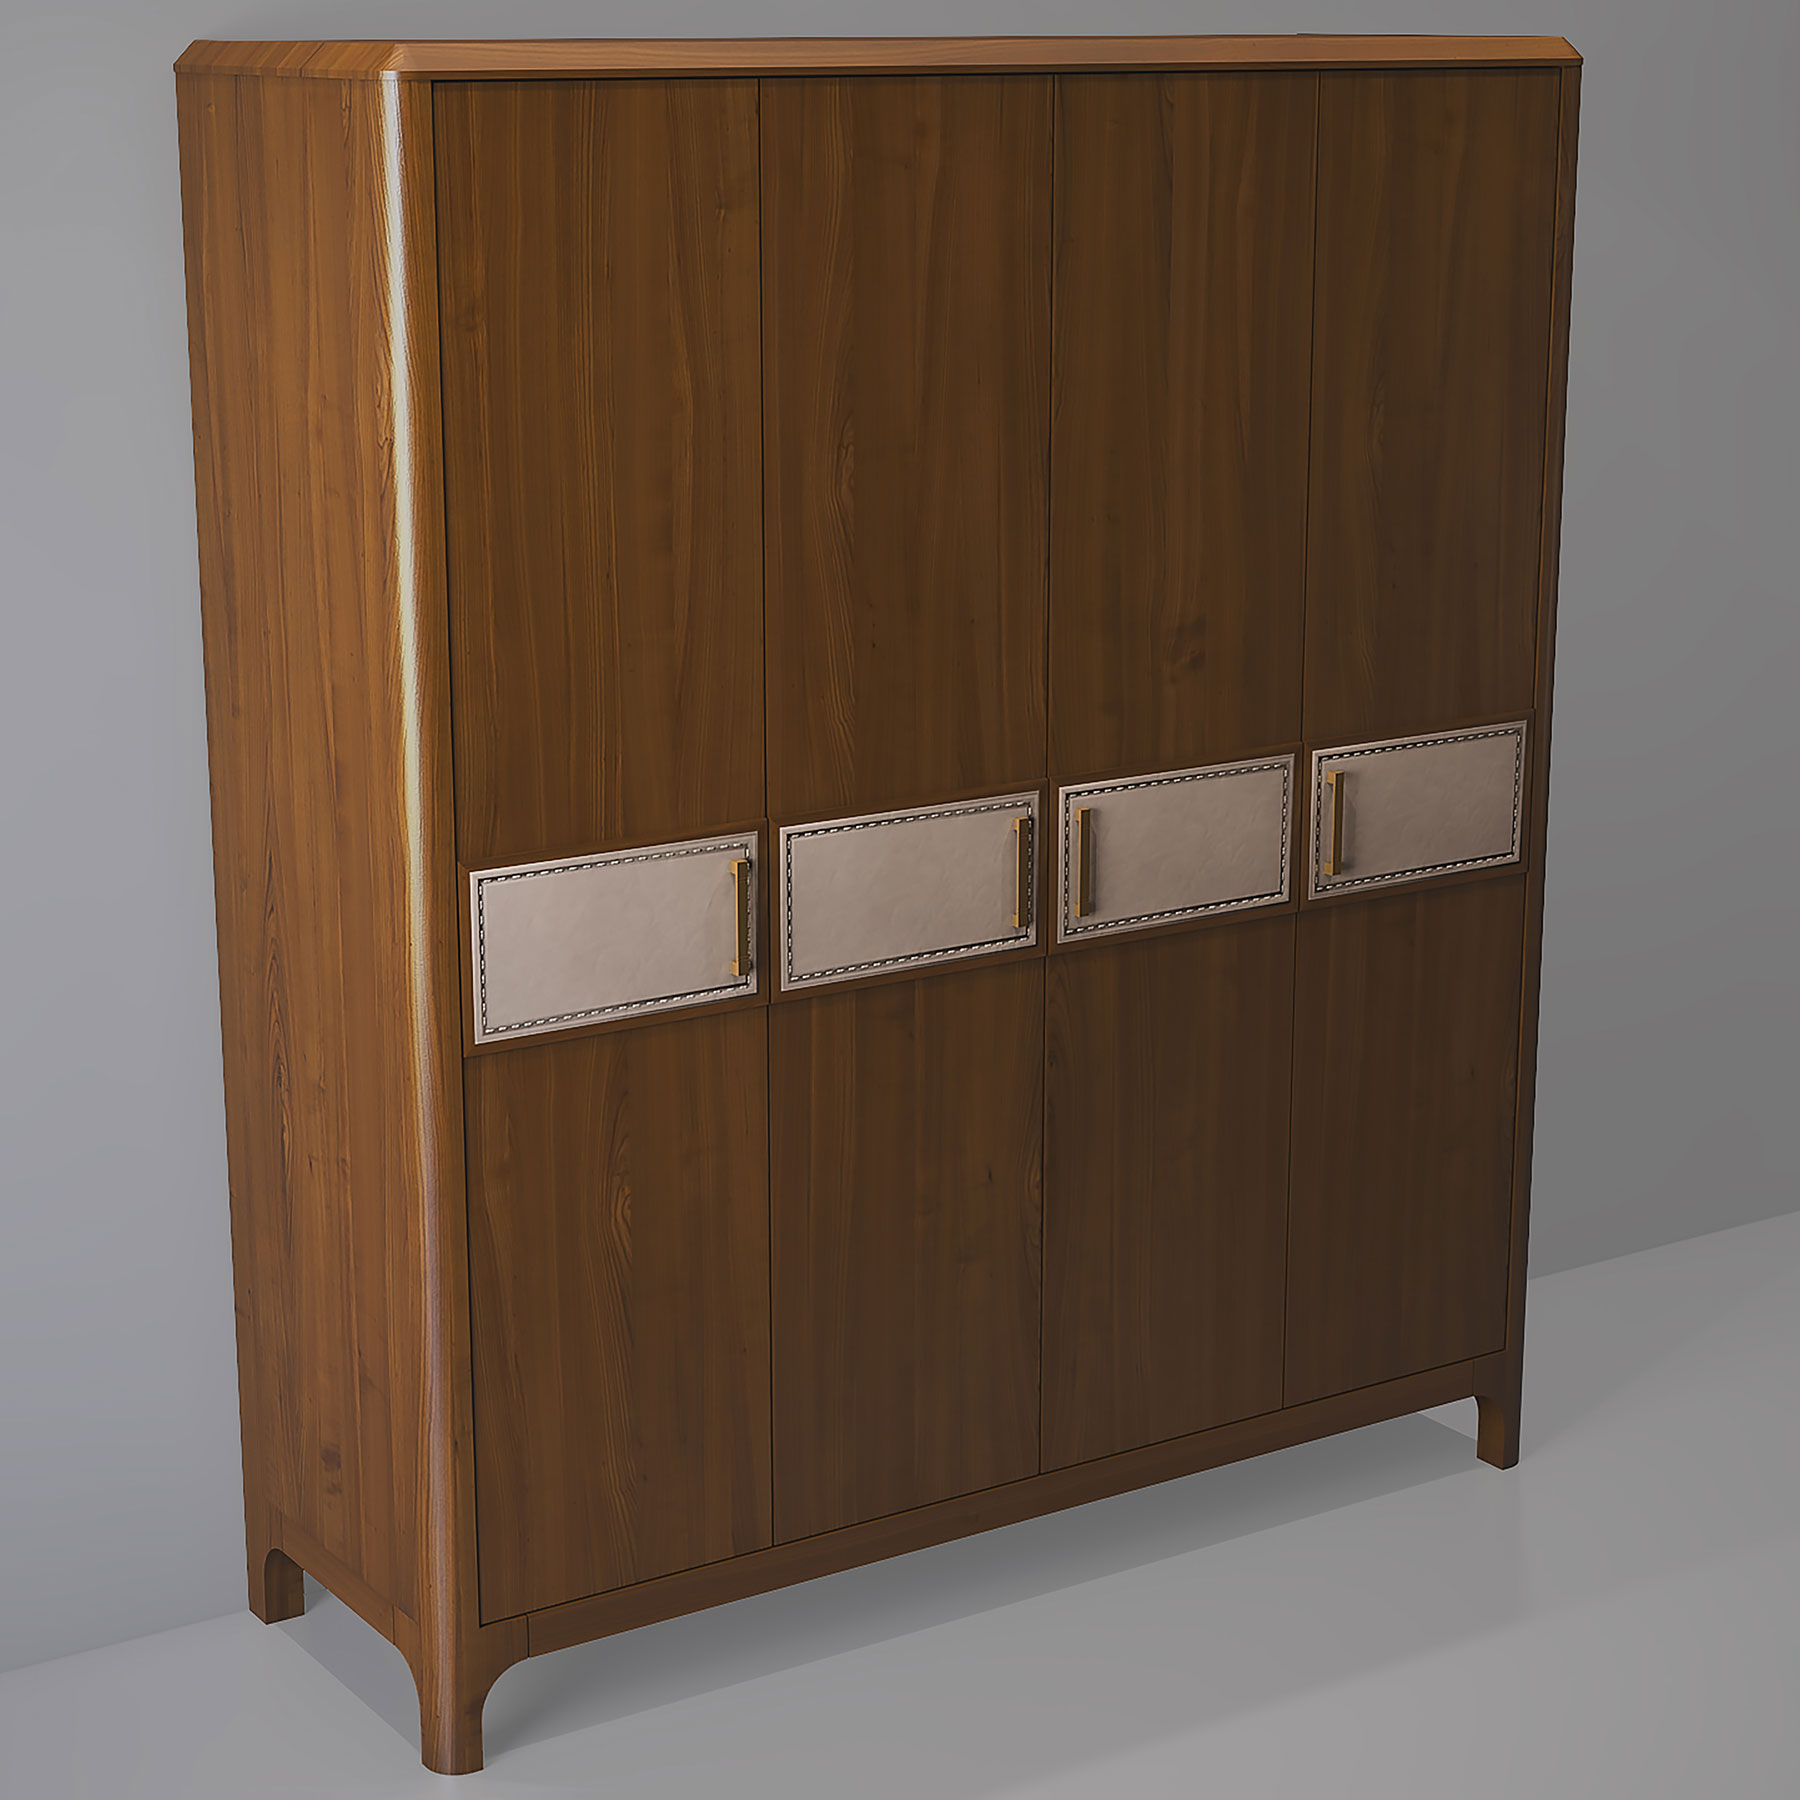 A four-door wardrobe from the Audrey collection 3